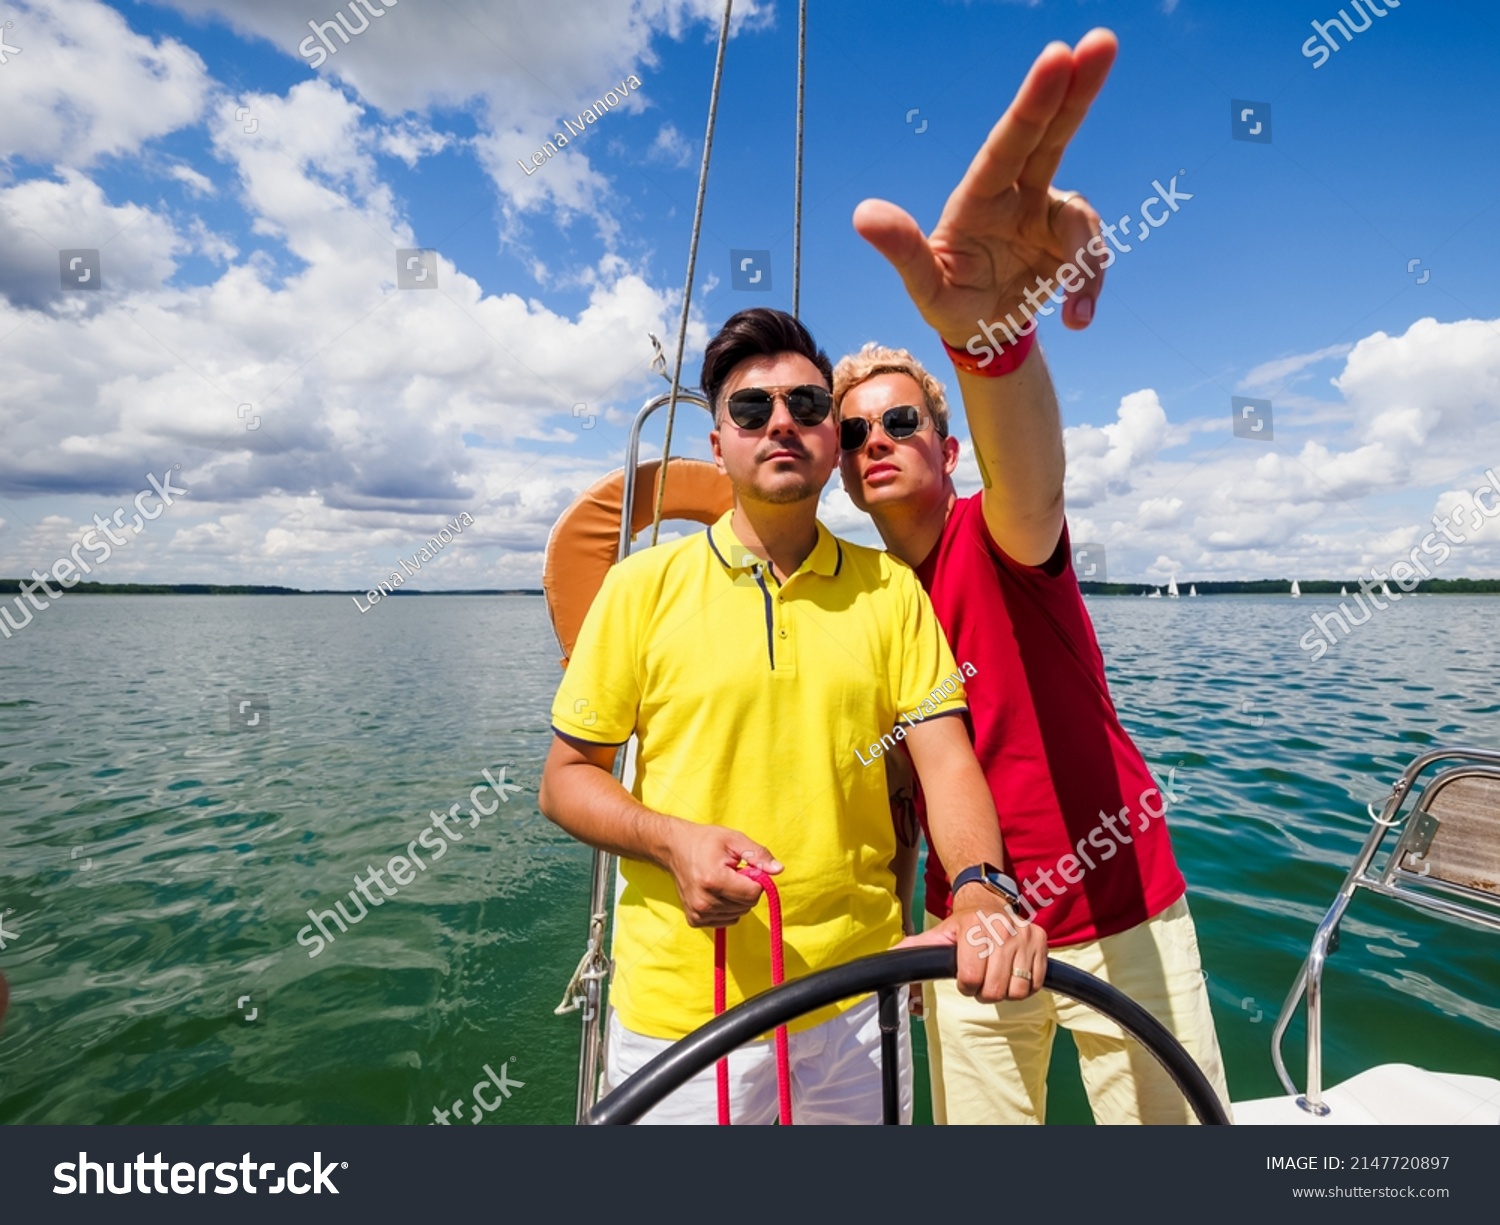 young person point forward his hand to his friend the direction of sailing on sailing yacht. summer vacations on sailing yacht #2147720897